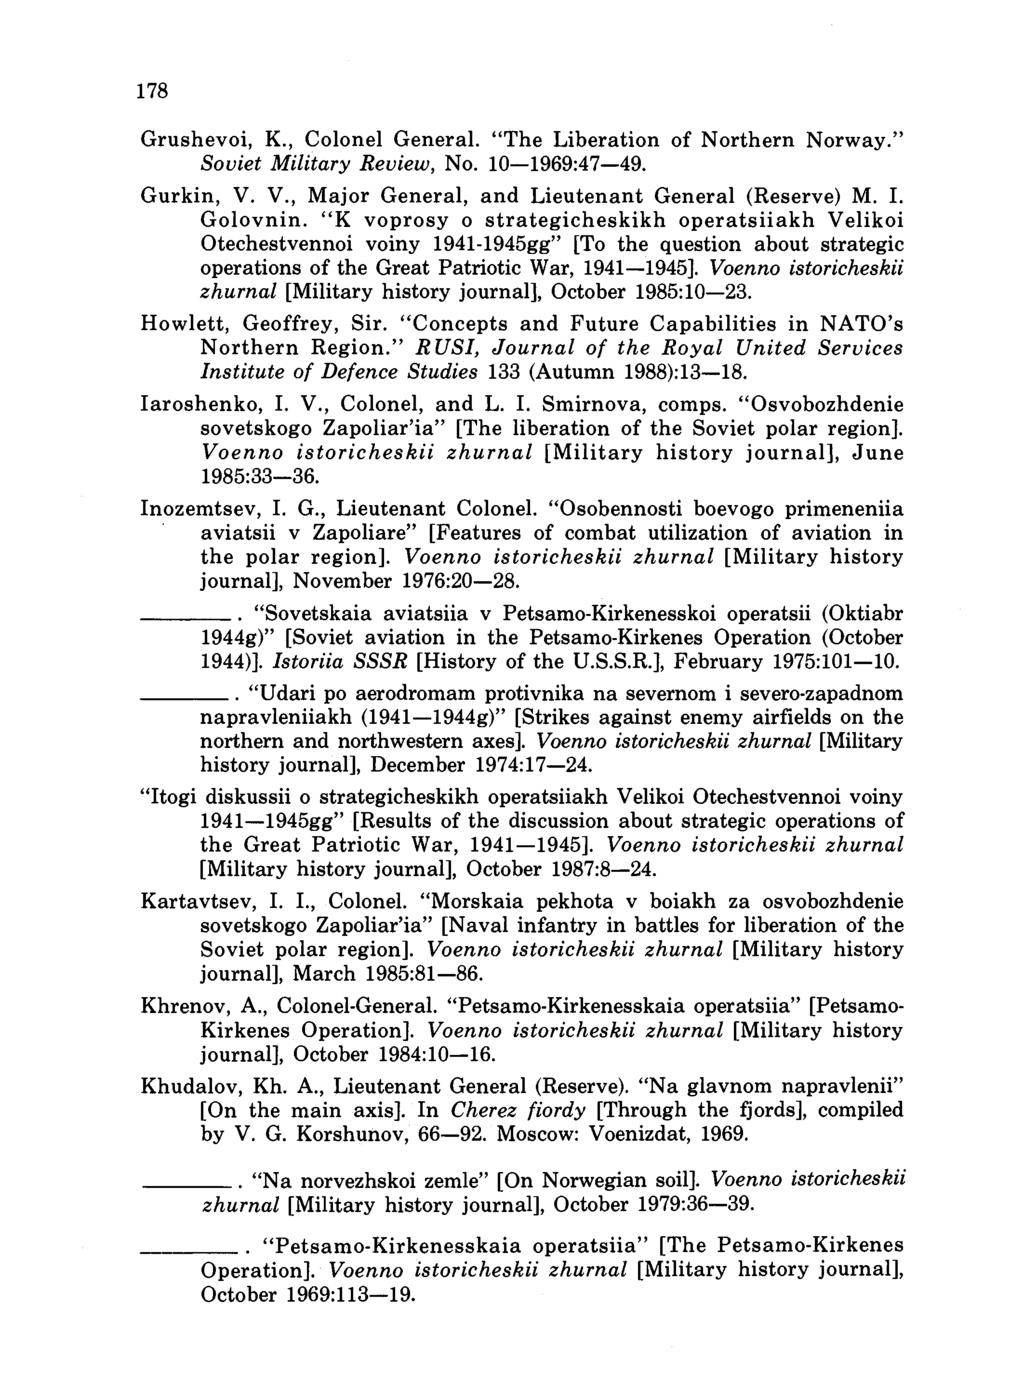 178 Grushevoi, K., Colonel General. "The Liberation of Northern Norway." Soviet Military Review, No. 10-1969:47-49. Gurkin, V. V., Major General, and Lieutenant General (Reserve) M. I. Golovnin.